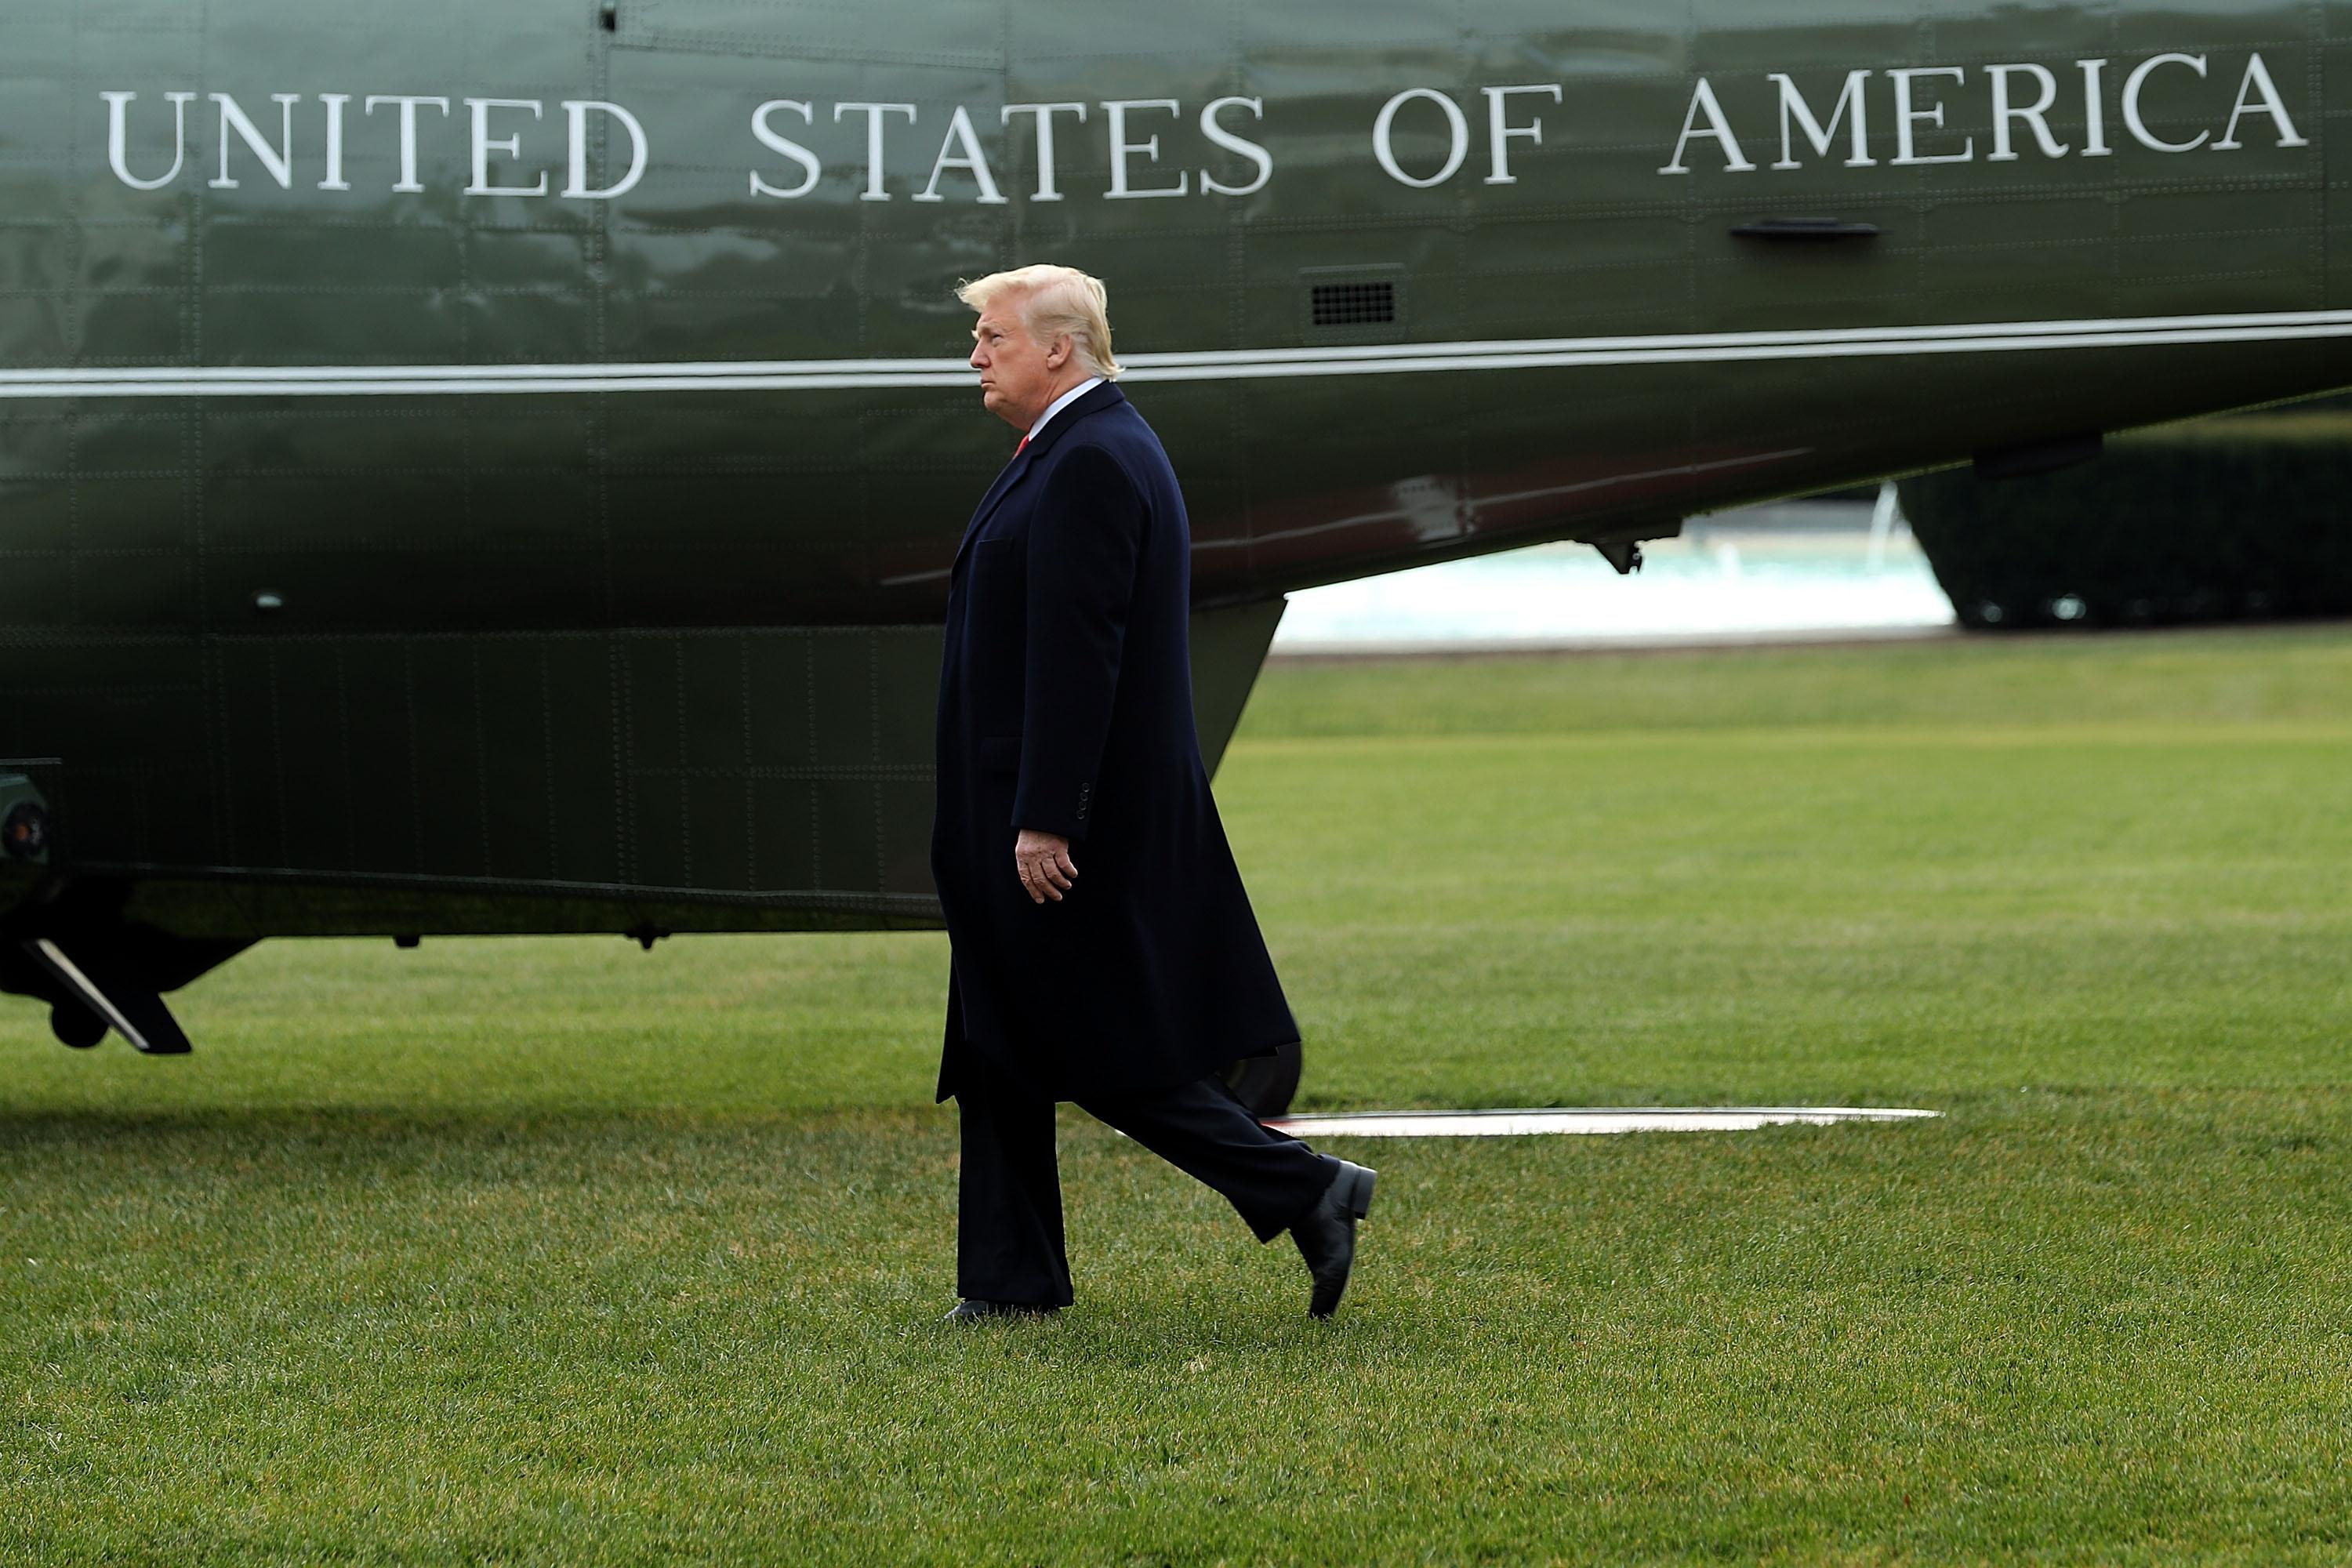 President Donald Trump walks across the South Lawn before boarding Marine One and leaving the White House December 22, 2017 in Washington, DC. Trump is leaving Washington to spend the Christmas holiday at his Mar-a-lago Estate in Palm Beach, Florida. 